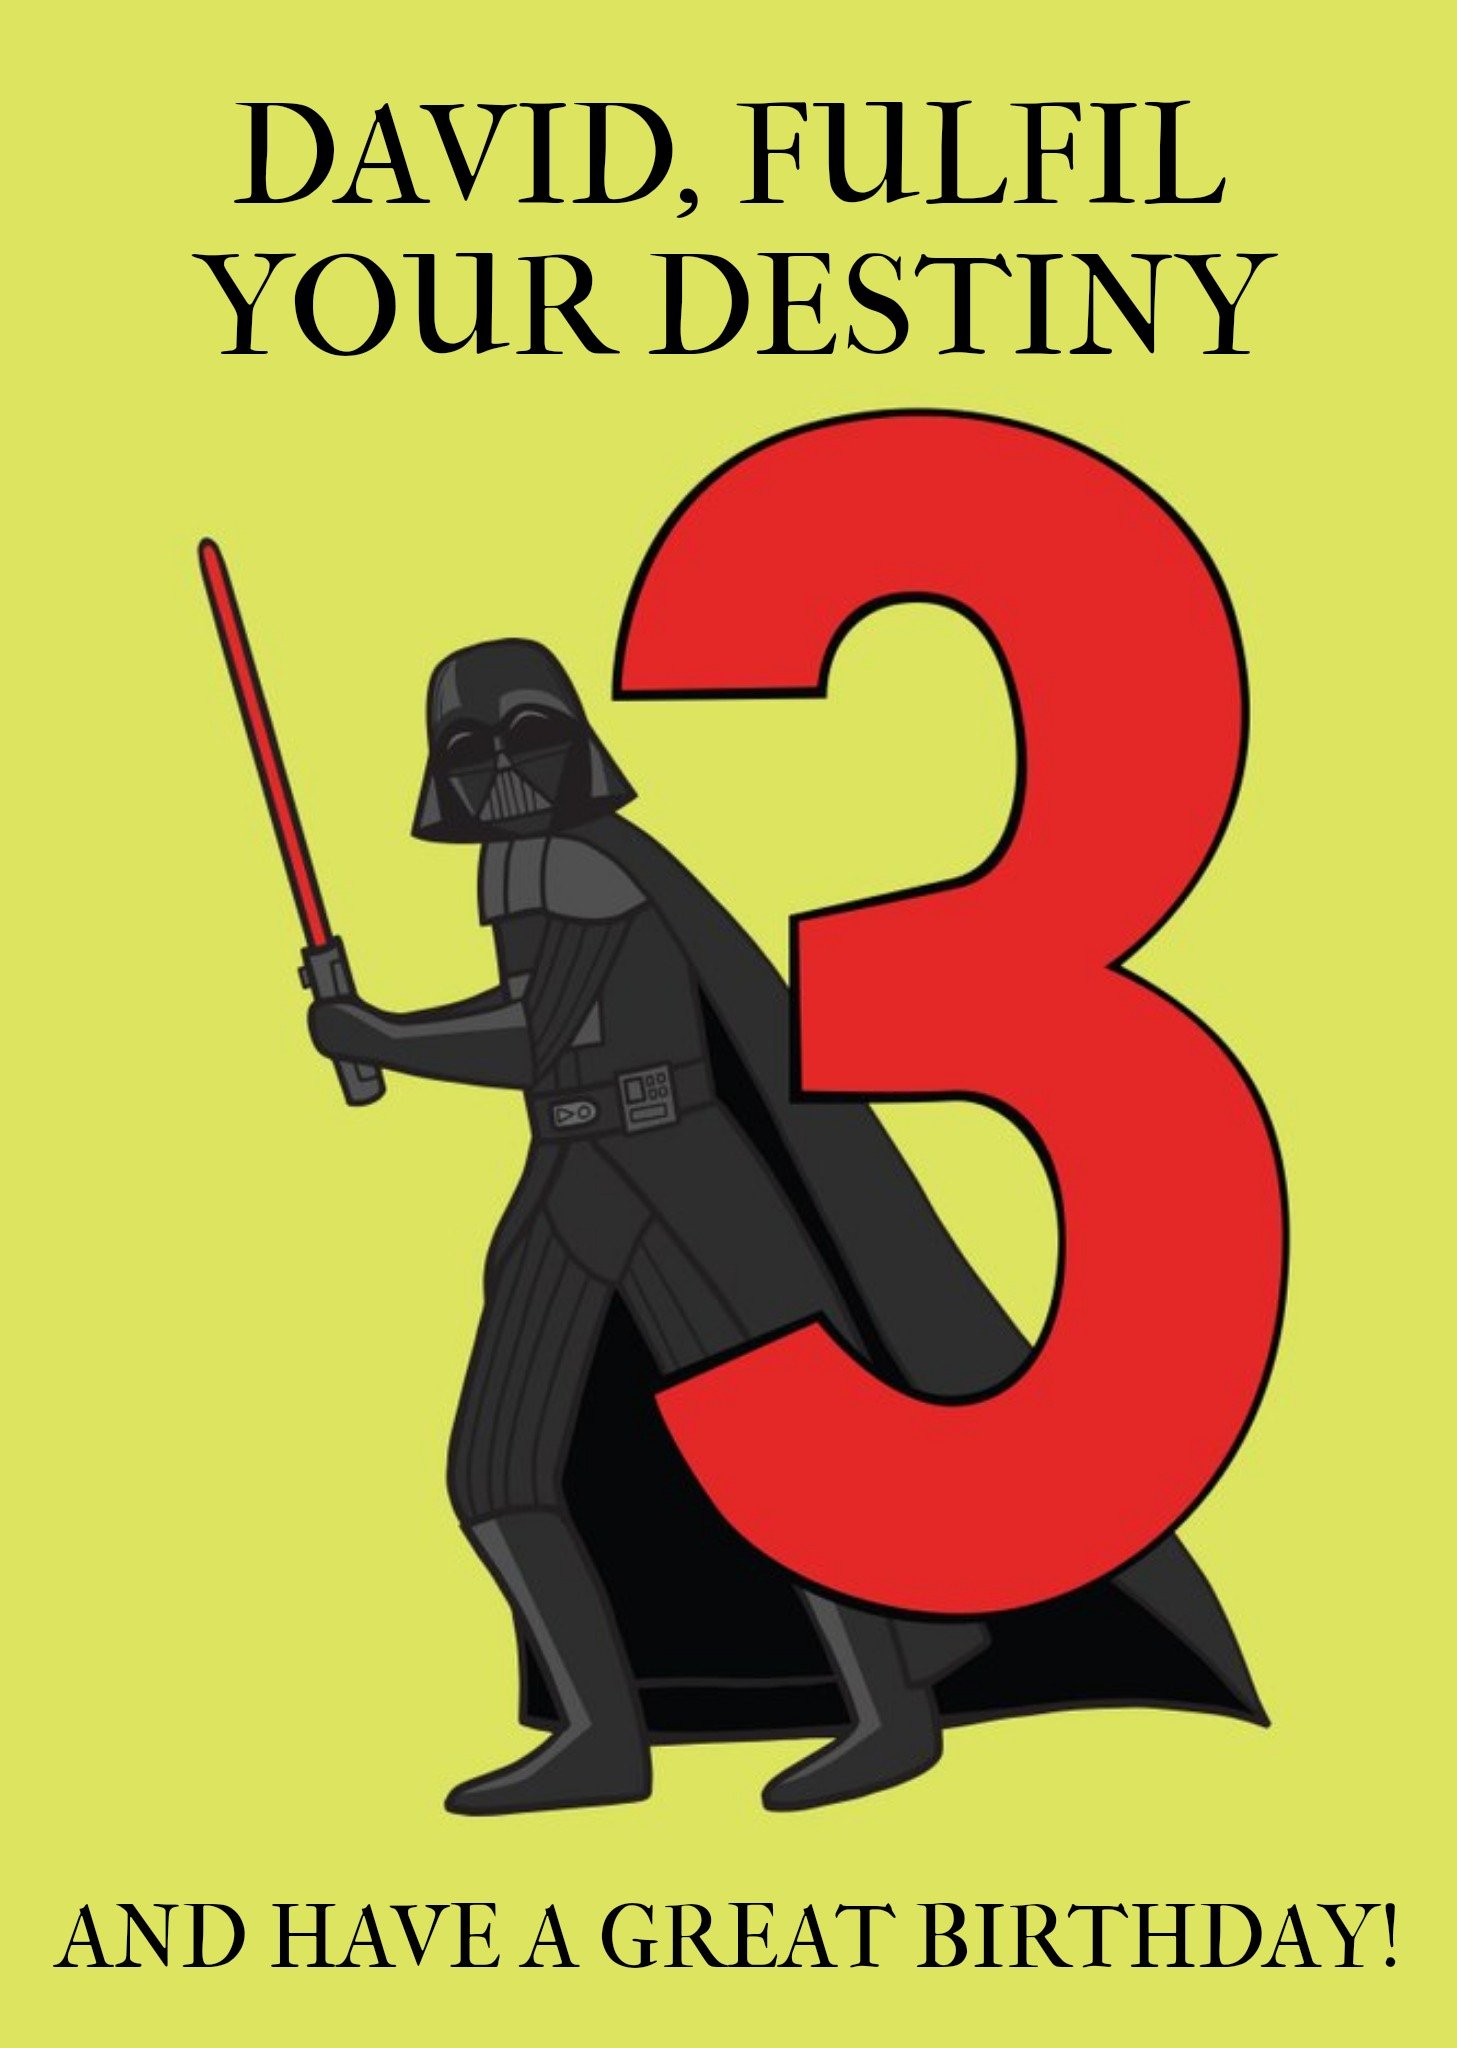 Disney Star Wars Fulfil Your Destiny And Have A Great Birthday Card, Large